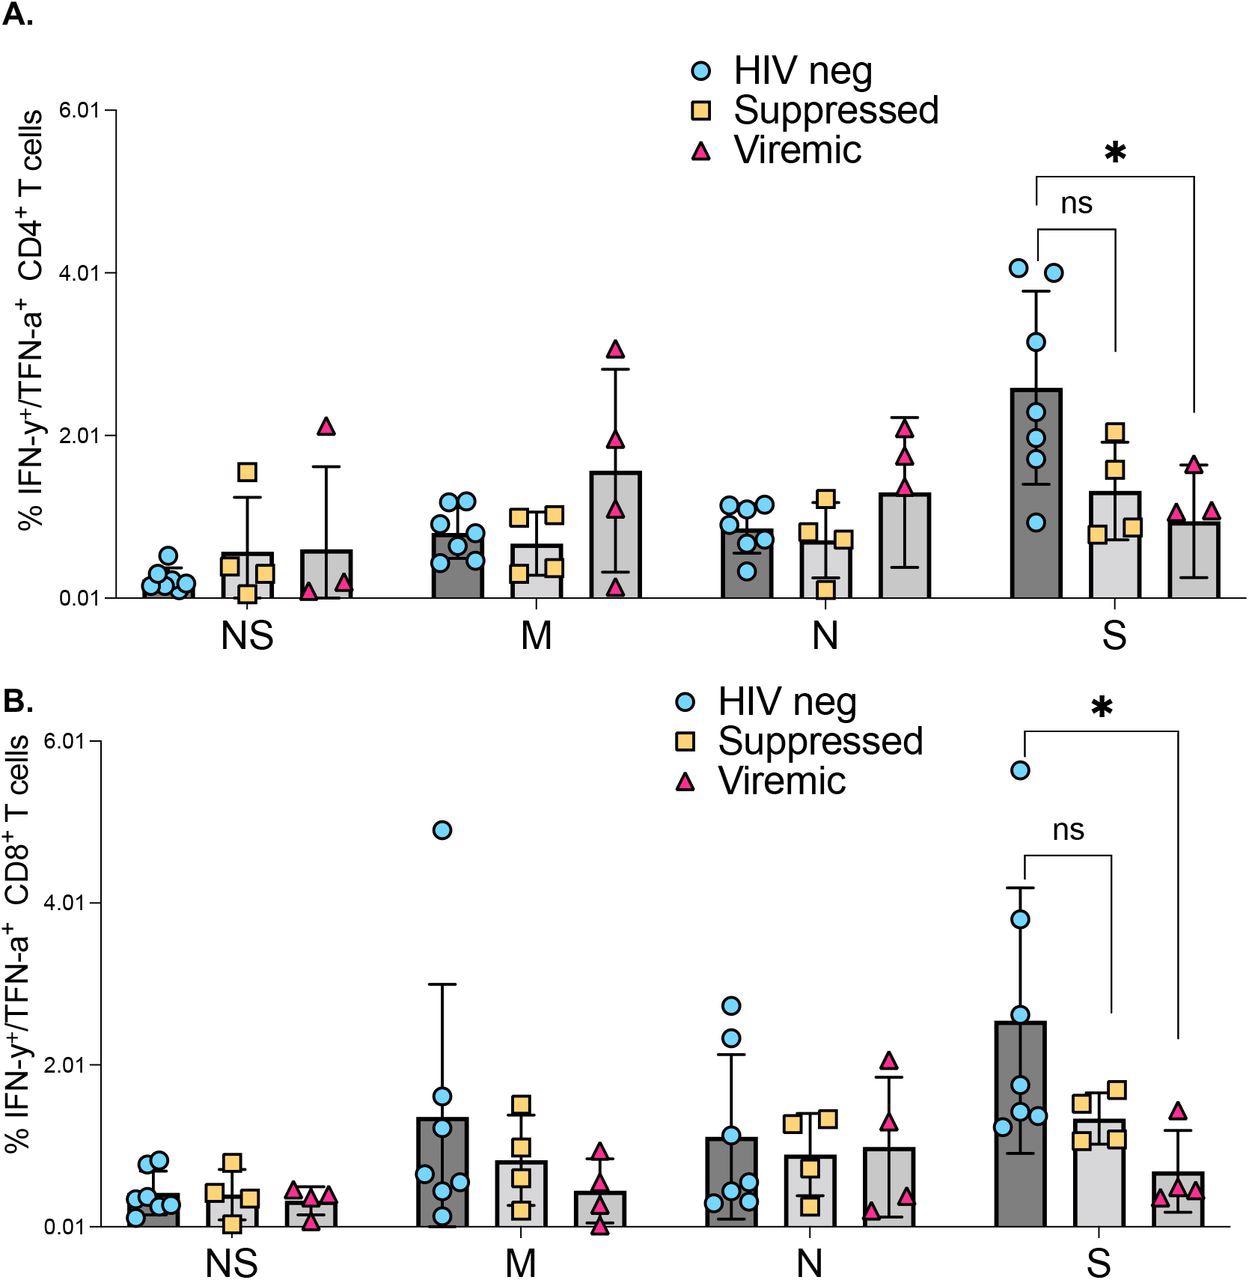 Comparison of SARS-CoV-2 protein targeting by T cell responses among HIV negatives, suppressed and viremic donors: